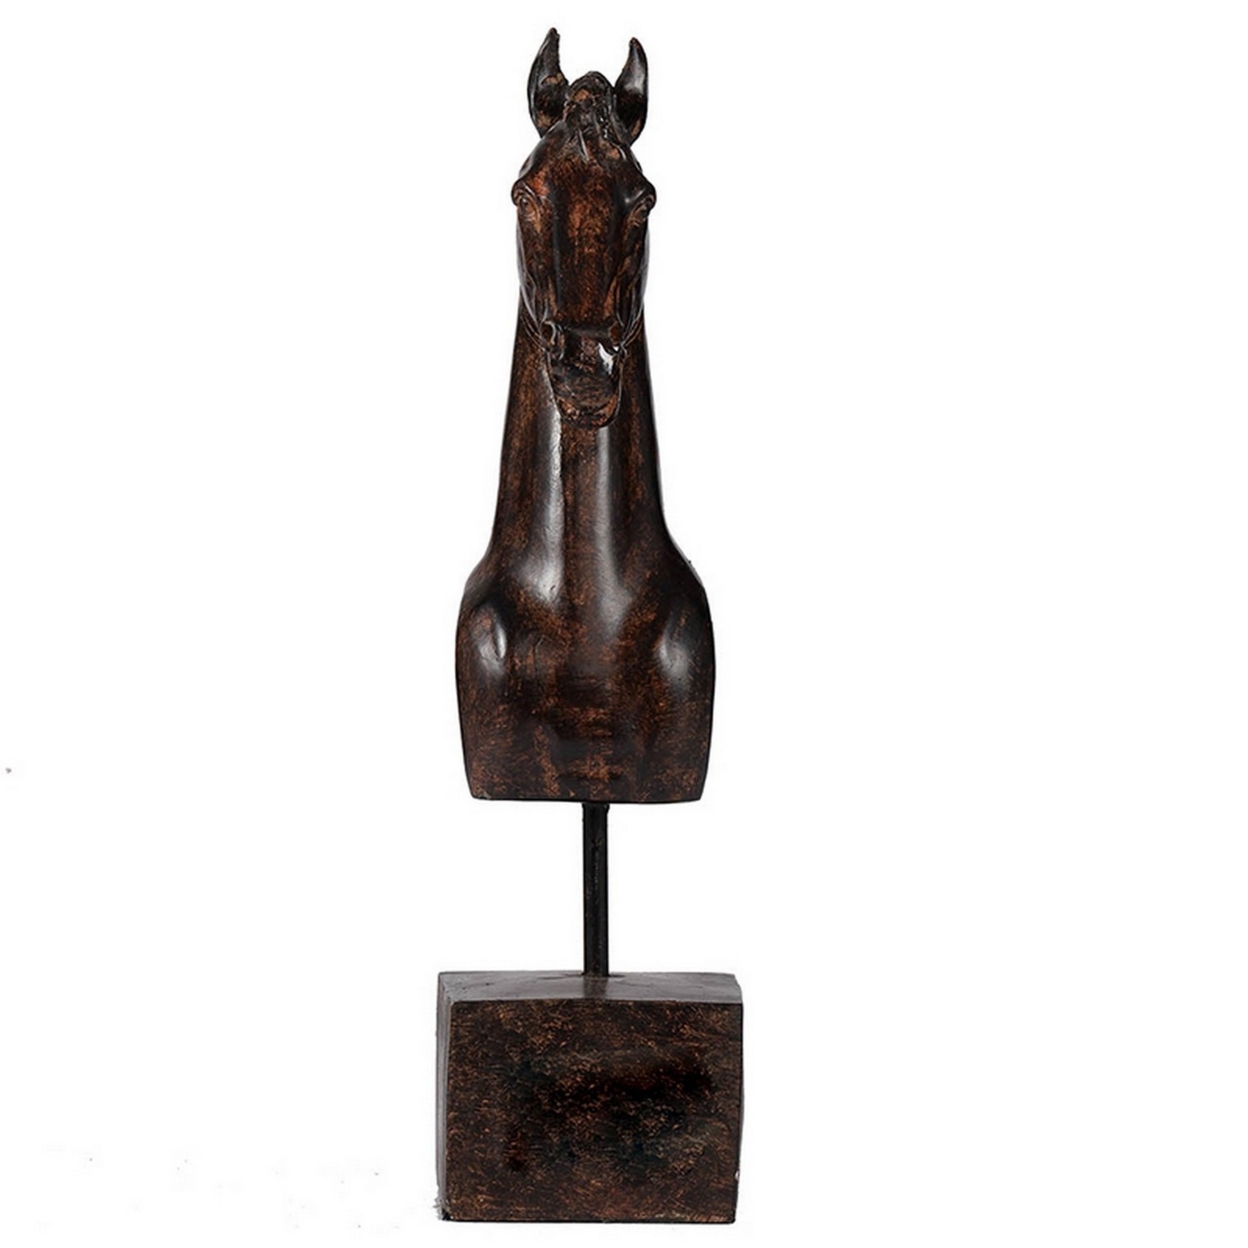 Don 11 Inch Horse Bust Statuette, Tabletop Accent Decor, Brown Resin, Metal- Saltoro Sherpi